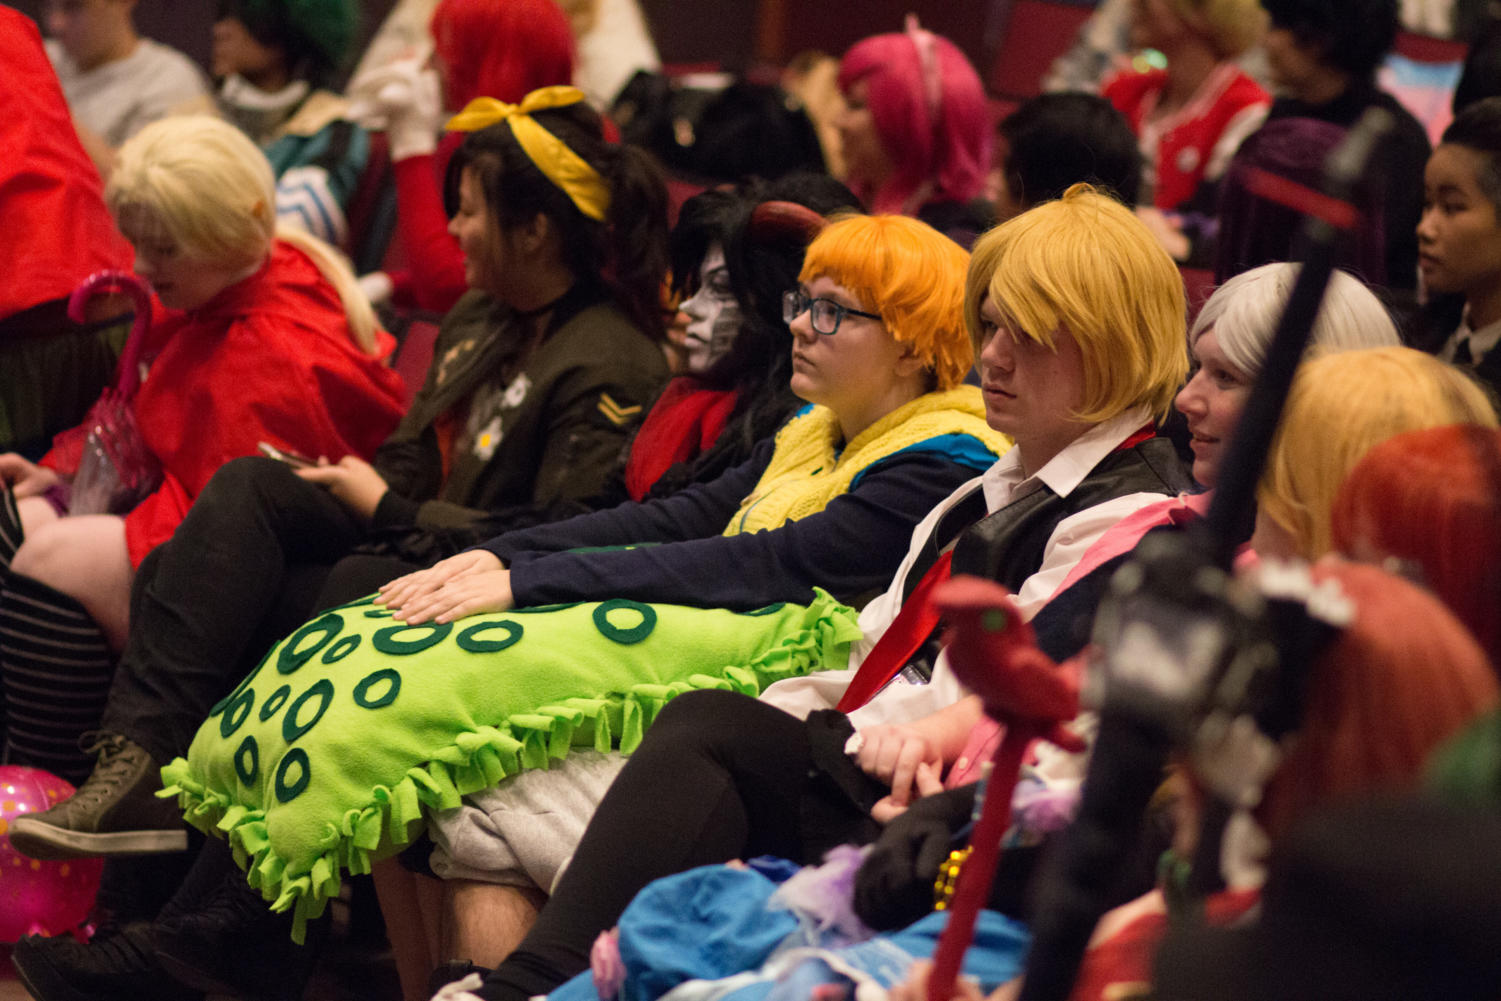 Cosplayers wait for the contest results to be announced.